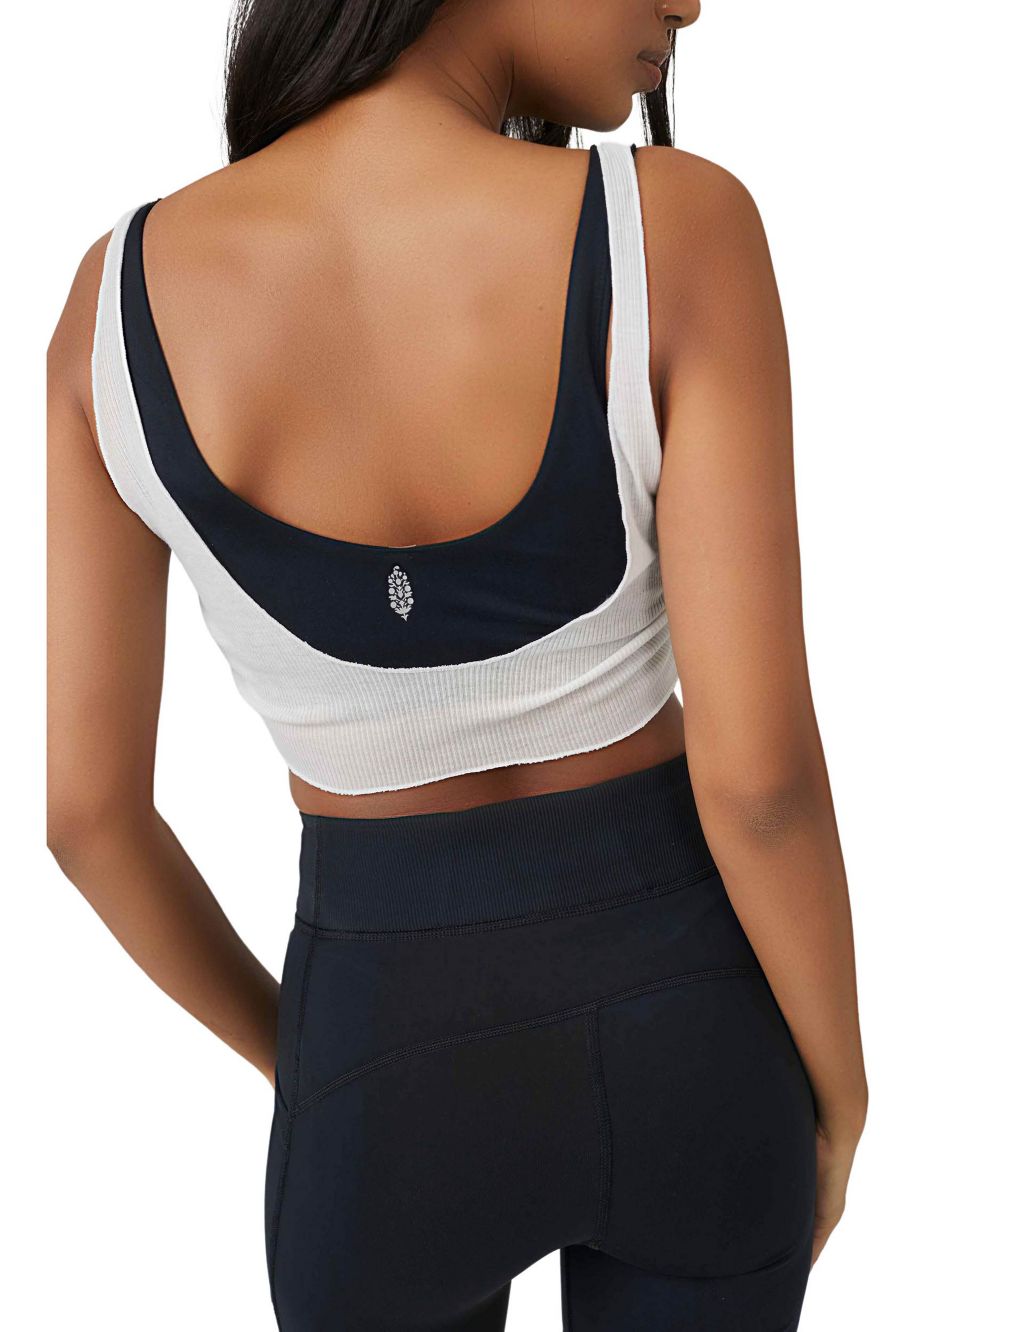 Reach For The Stars Sports Bra image 4